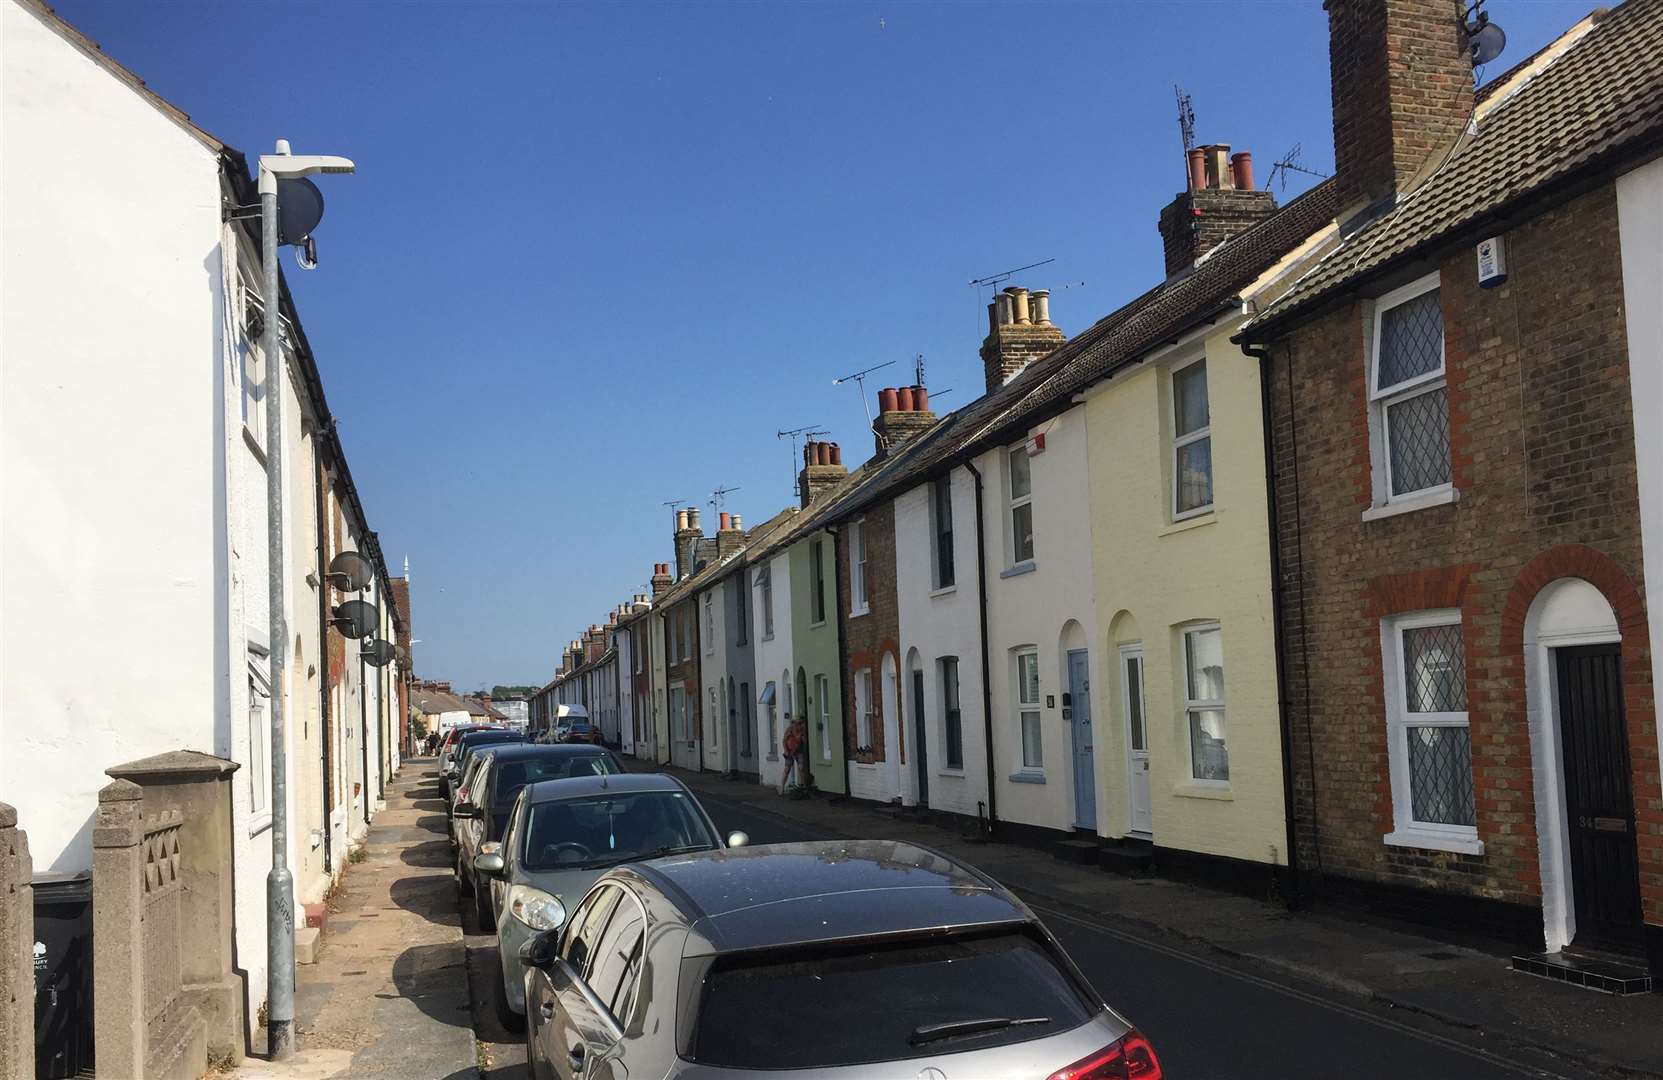 Albert Street is jam-packed with second homes and holiday lets